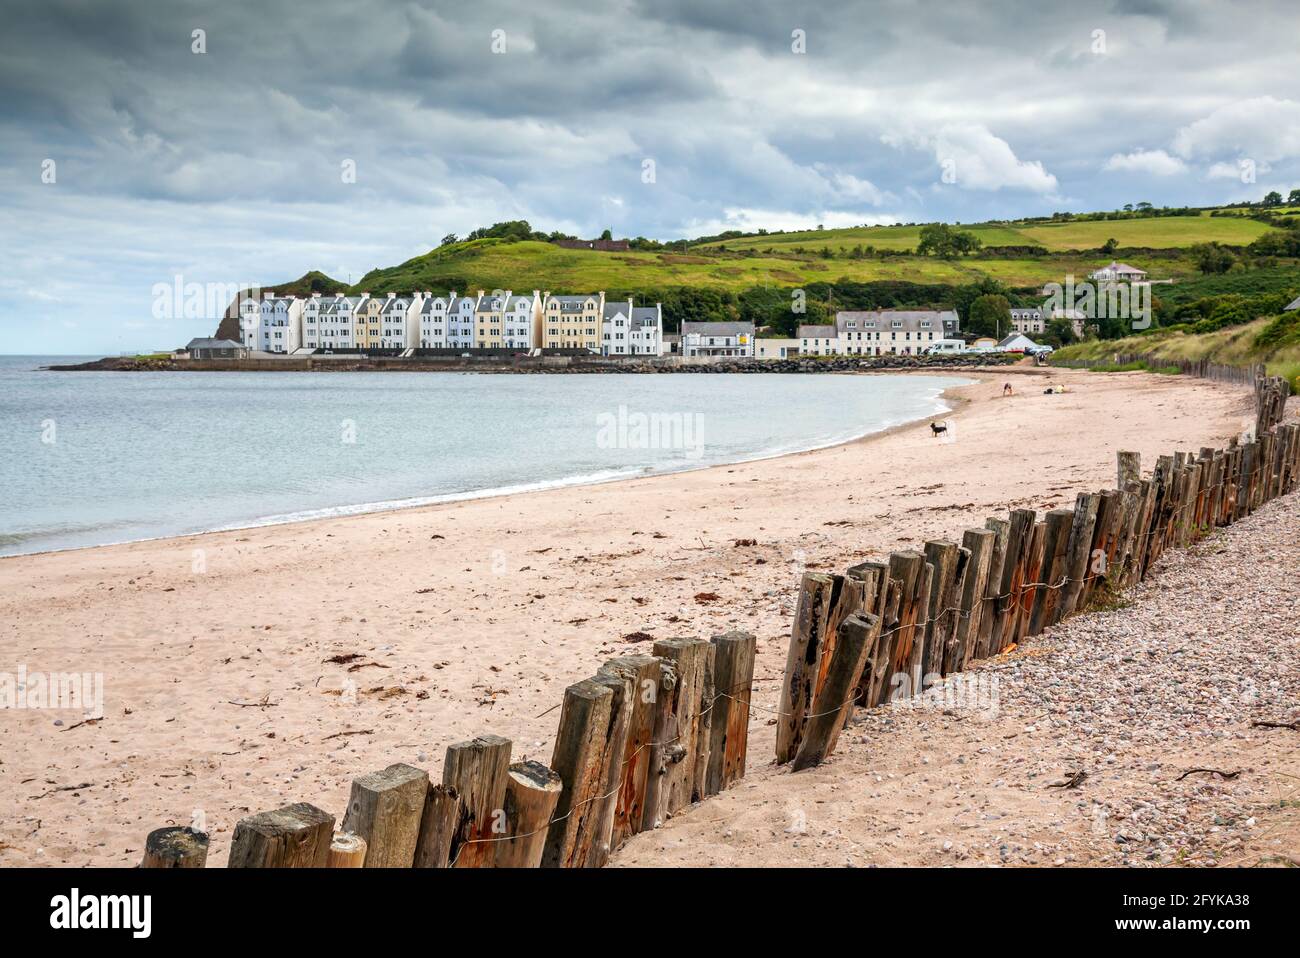 The beach and wooden breakwater at the picturesque village of Cushendun on the coast of County Antrim, Northern Ireland. Stock Photo